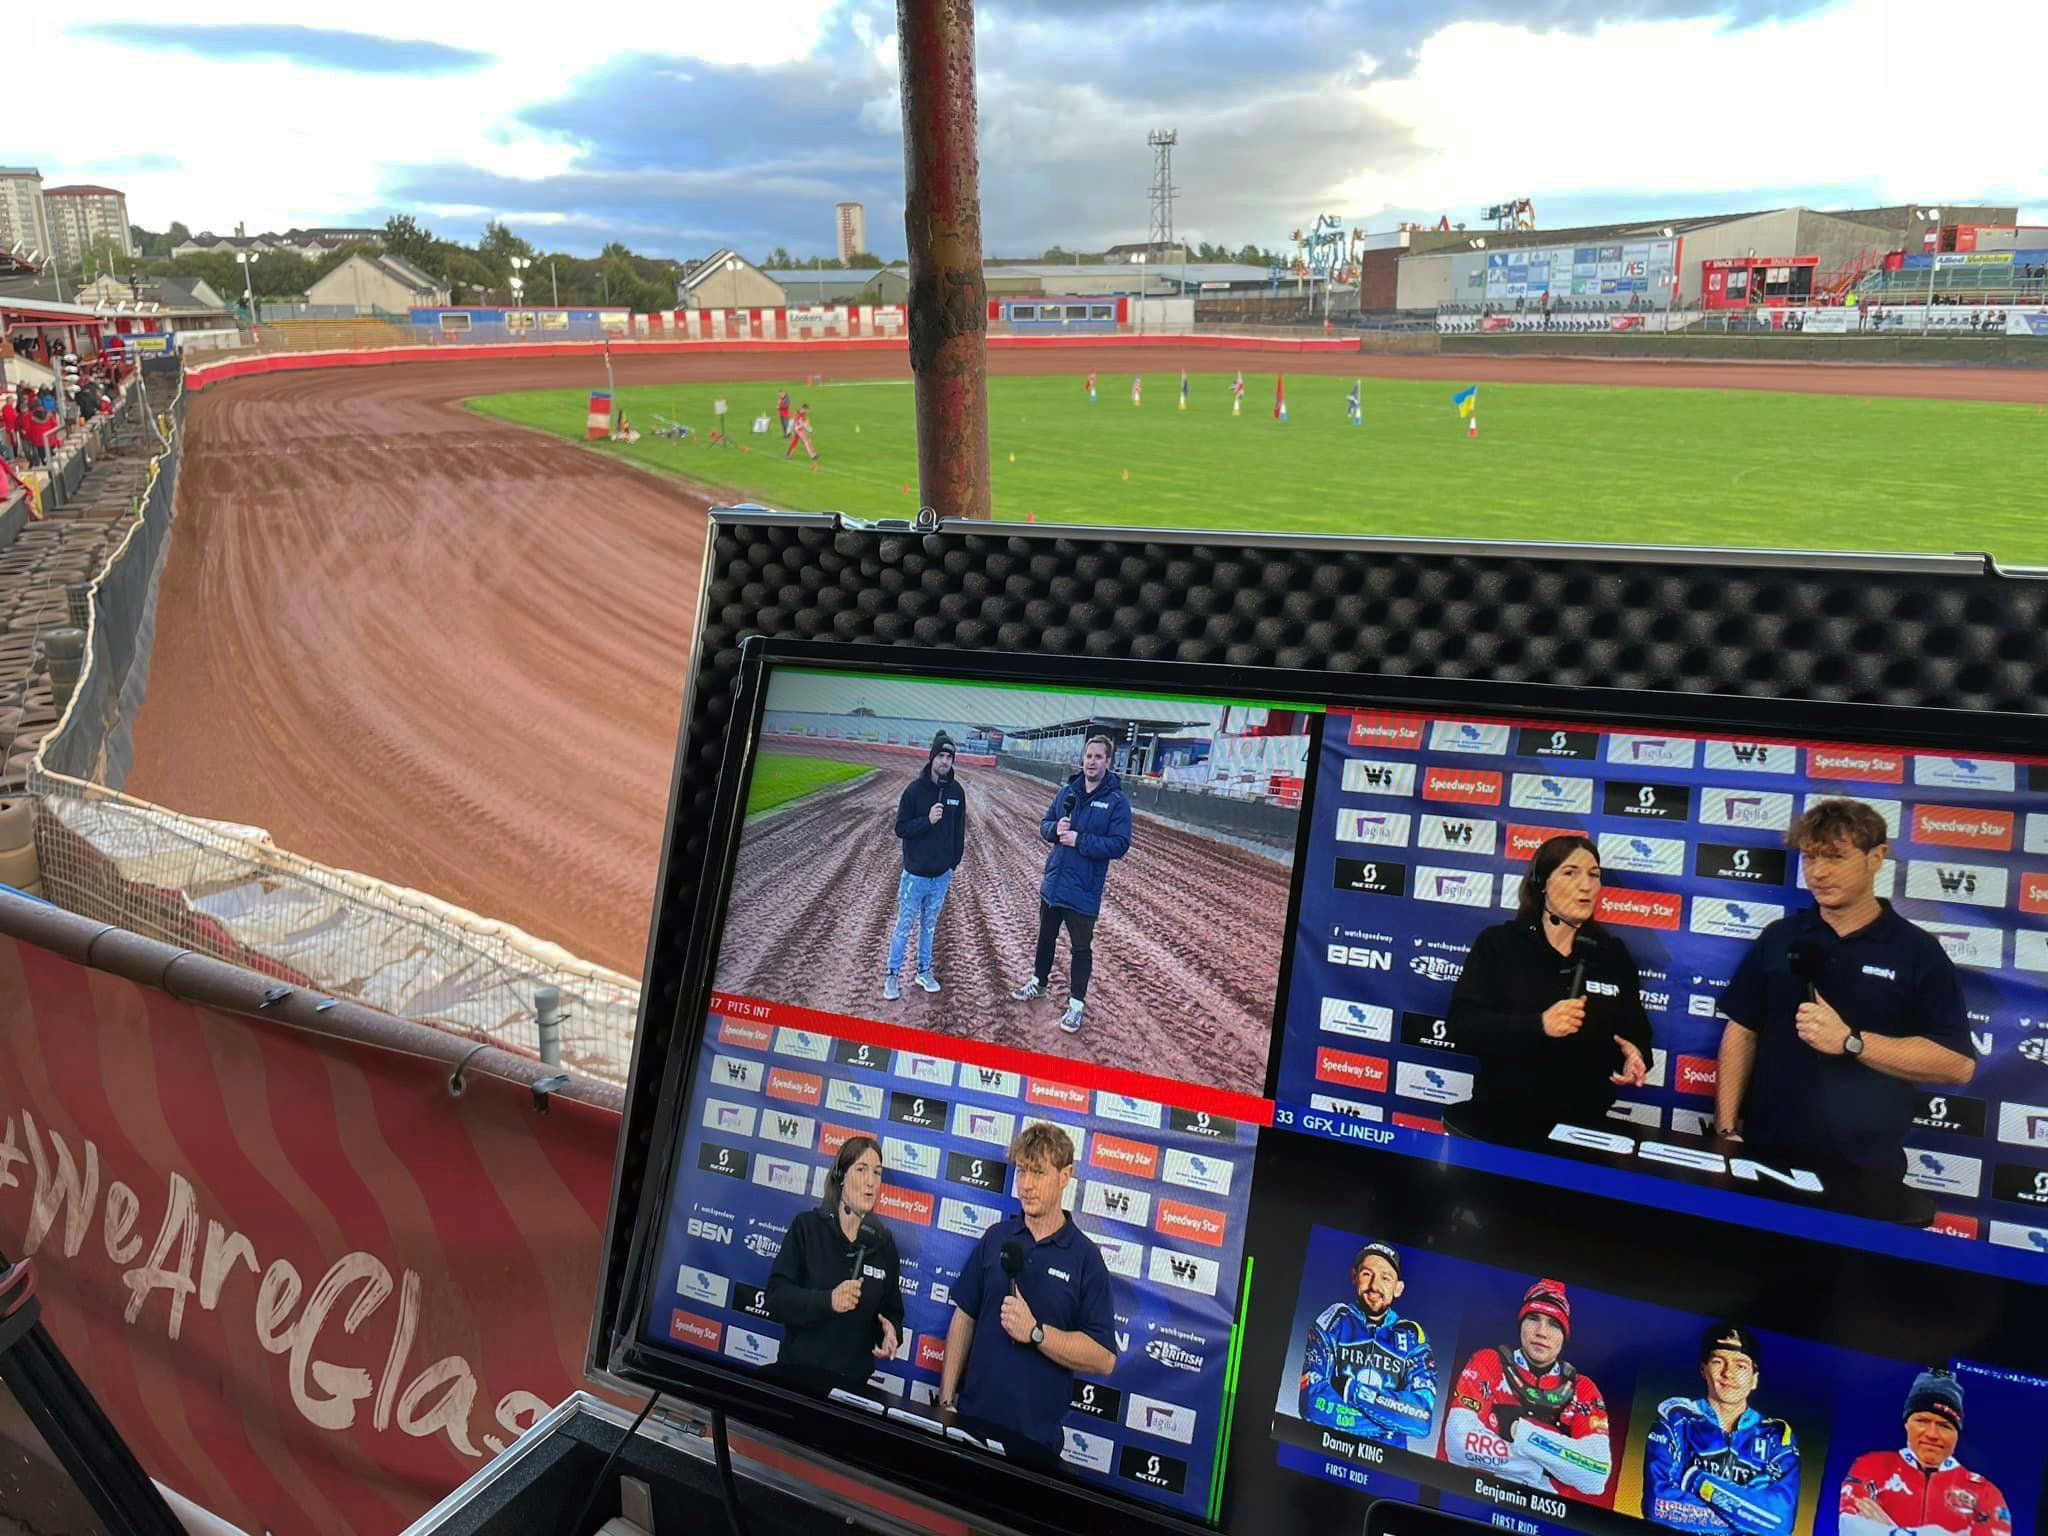 British Speedway Fans Benefit from Streaming Quality Upgrade as ExStream Media Deploys LiveU’s LU300S Solution